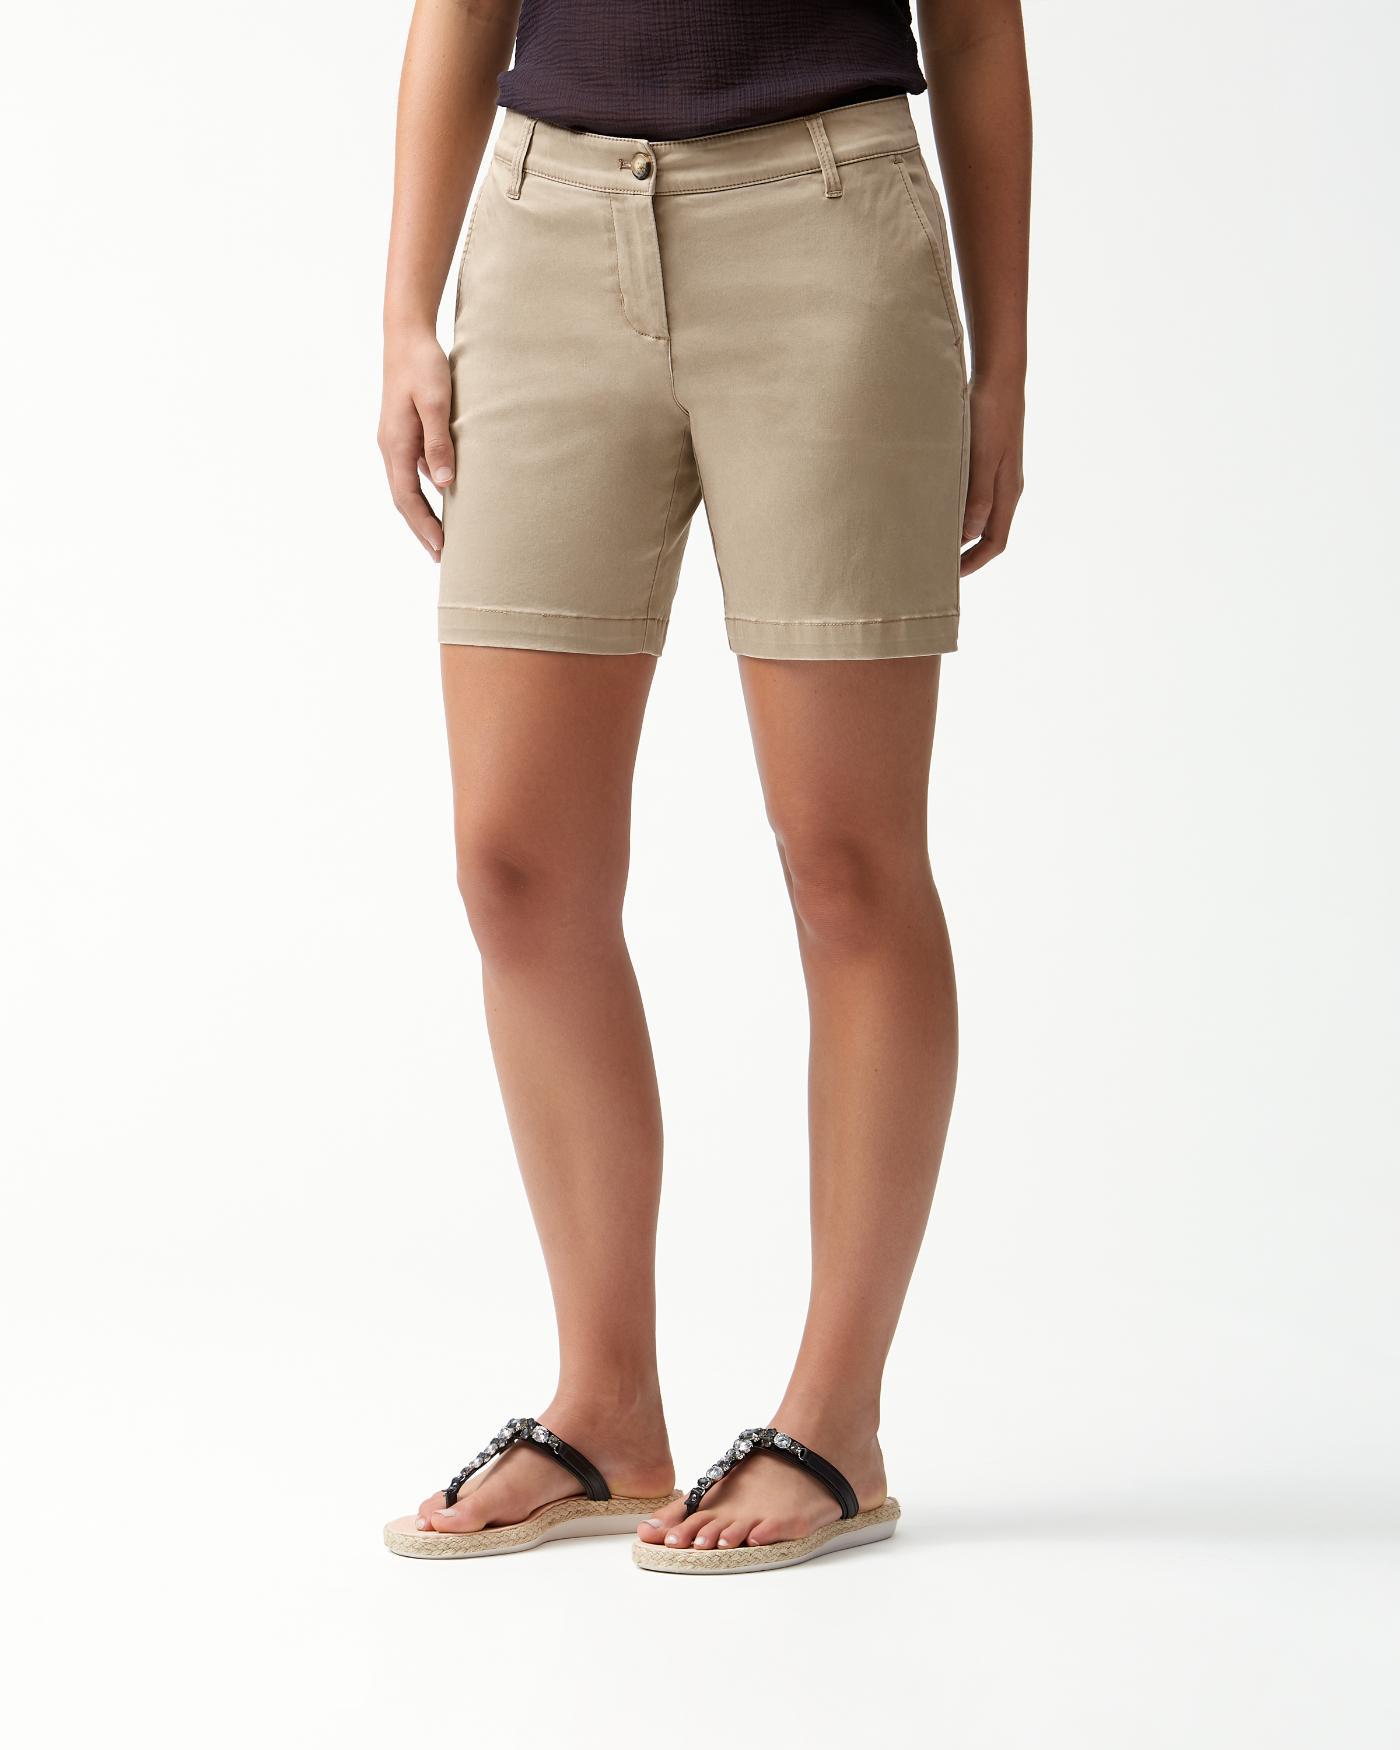 Tommy Bahama Cotton Boracay 7-inch Shorts in Natural - Lyst